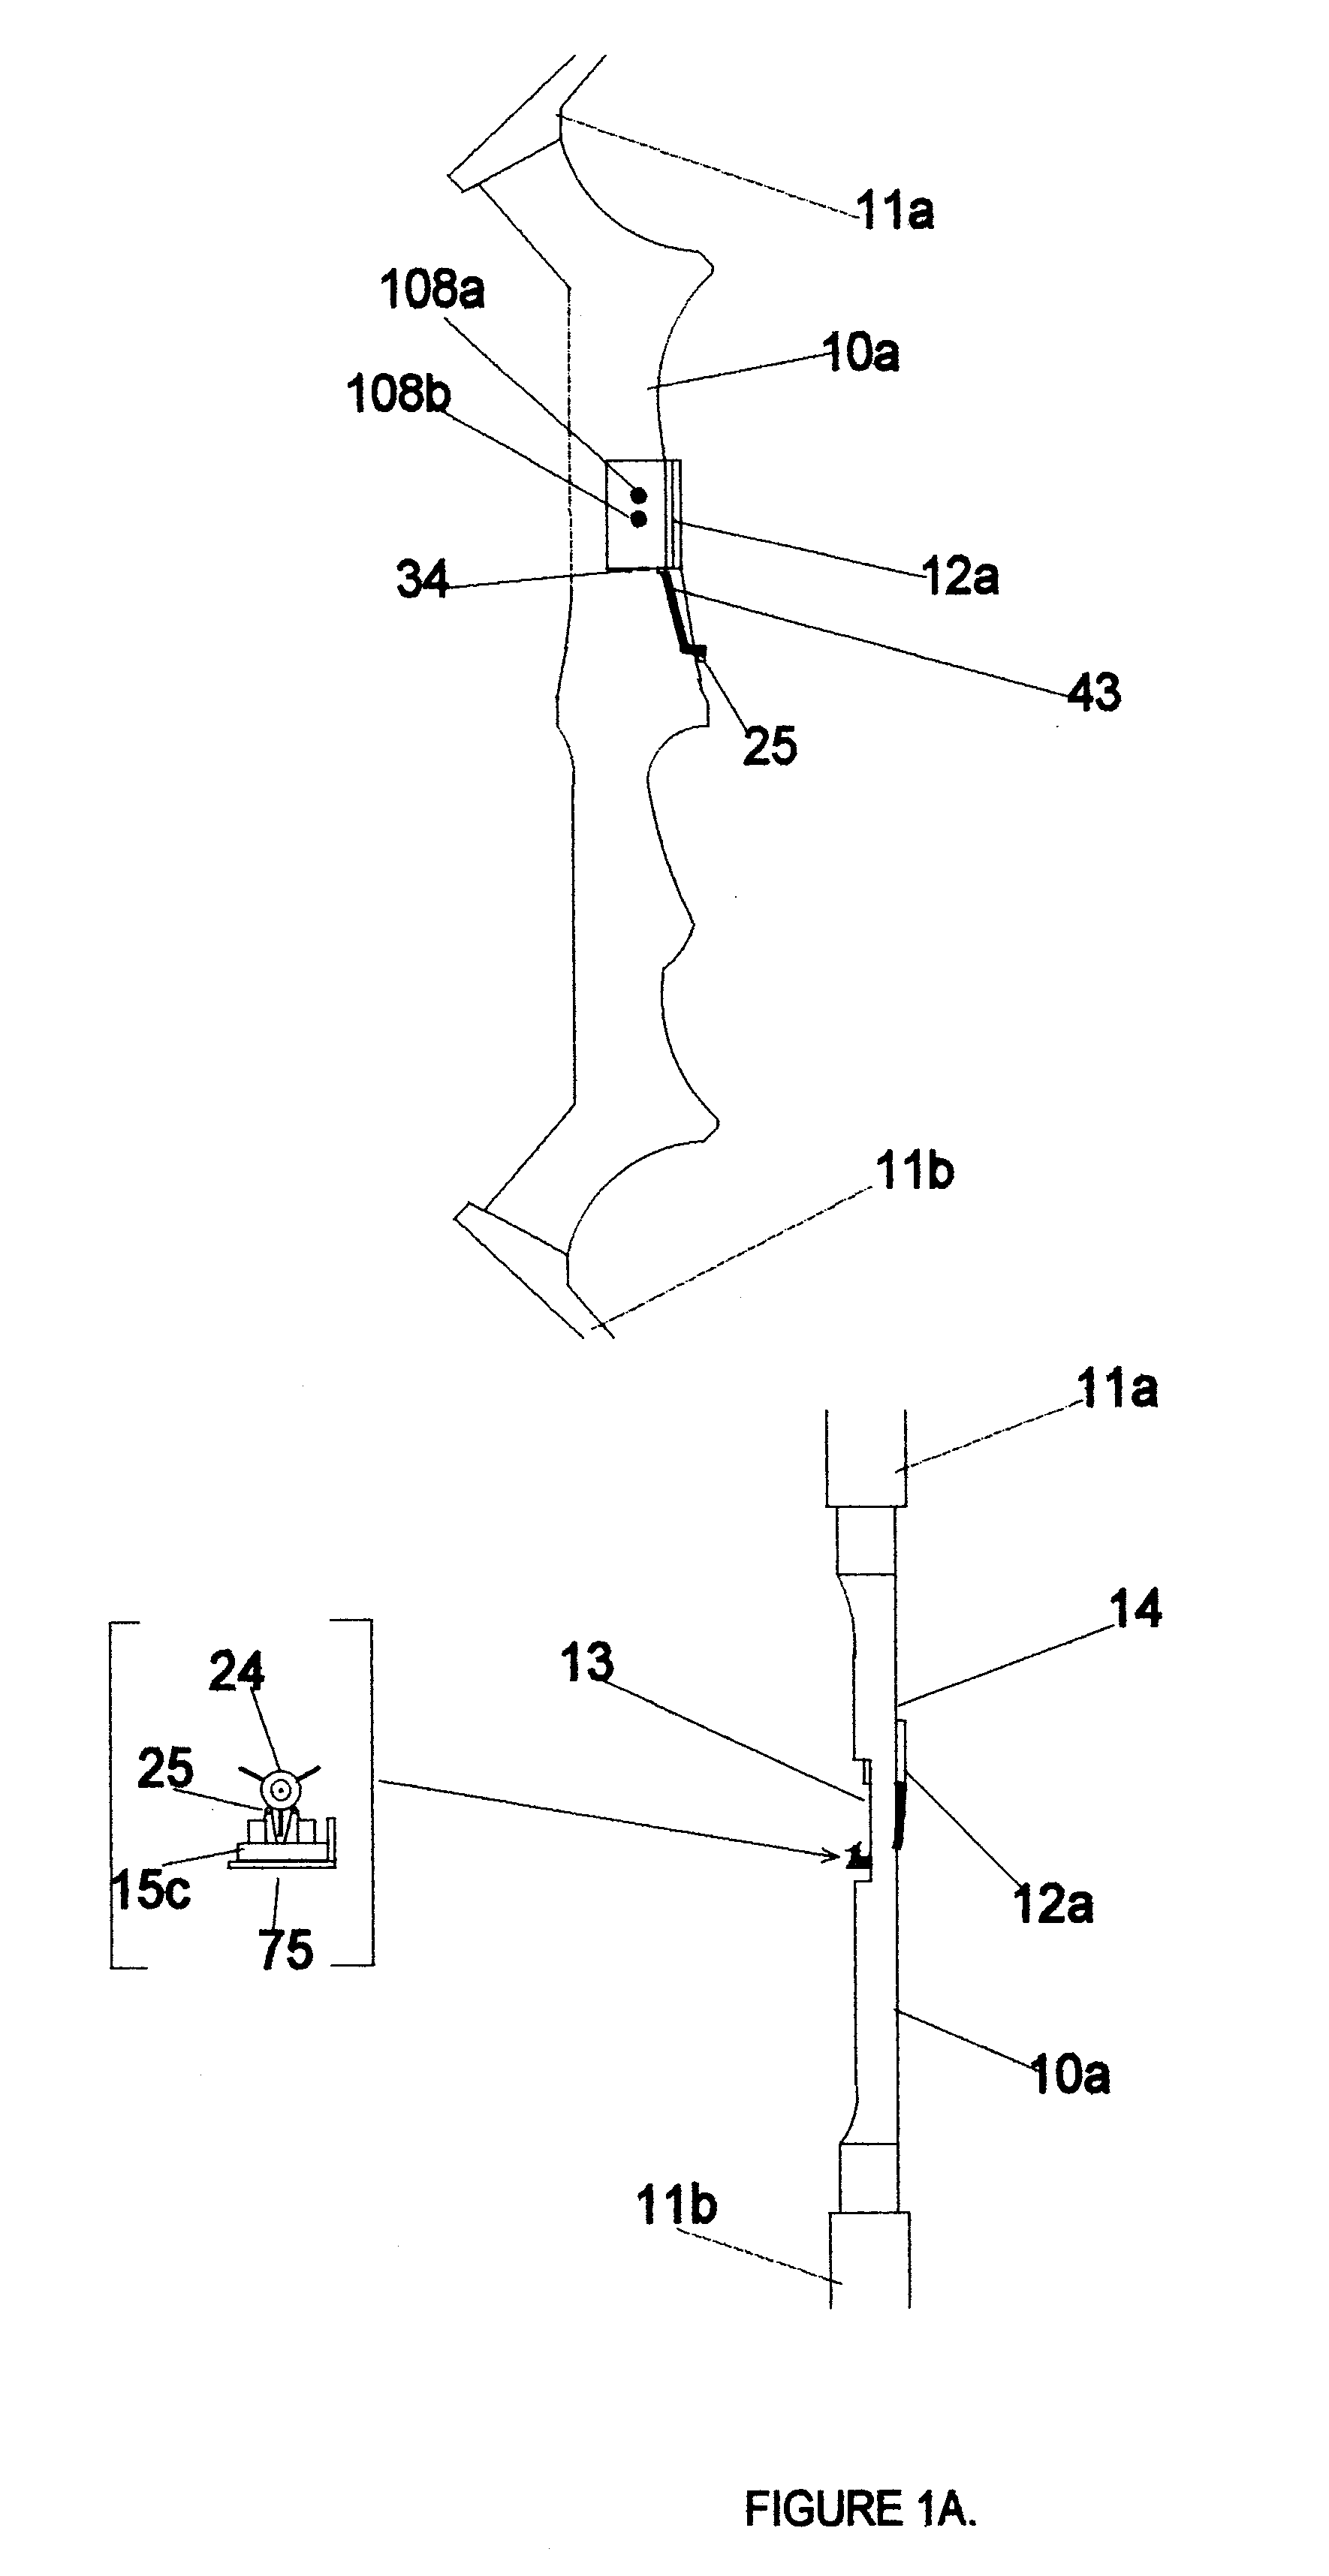 Bow-mounted apparatus for detection and quantification of deviations in dynamic arrow position